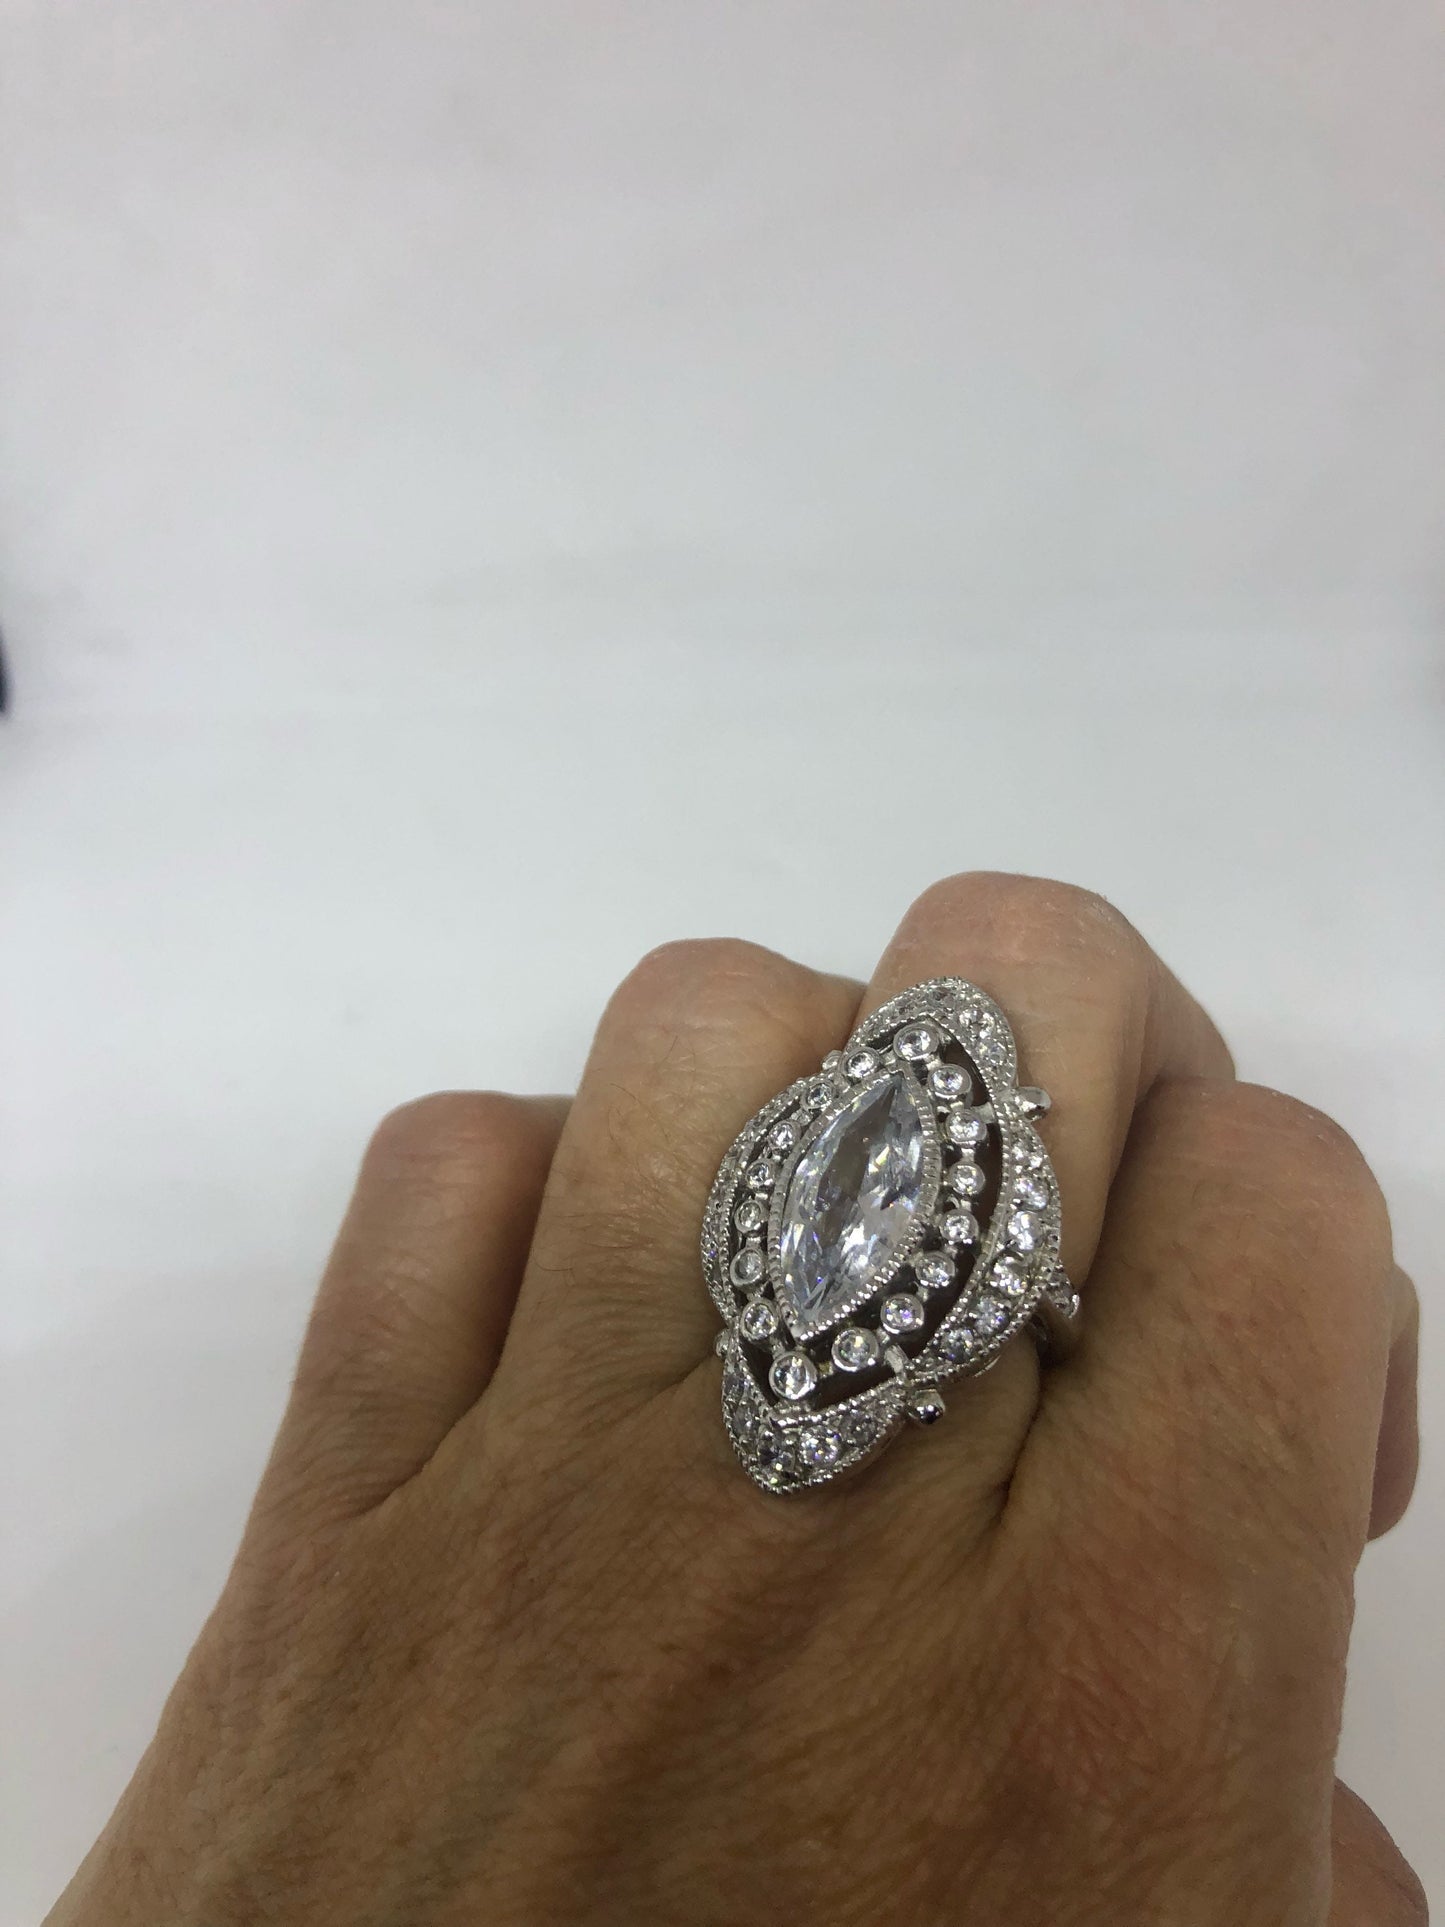 Vintage Cubic Zirconia Crystal Sterling Silver Ring